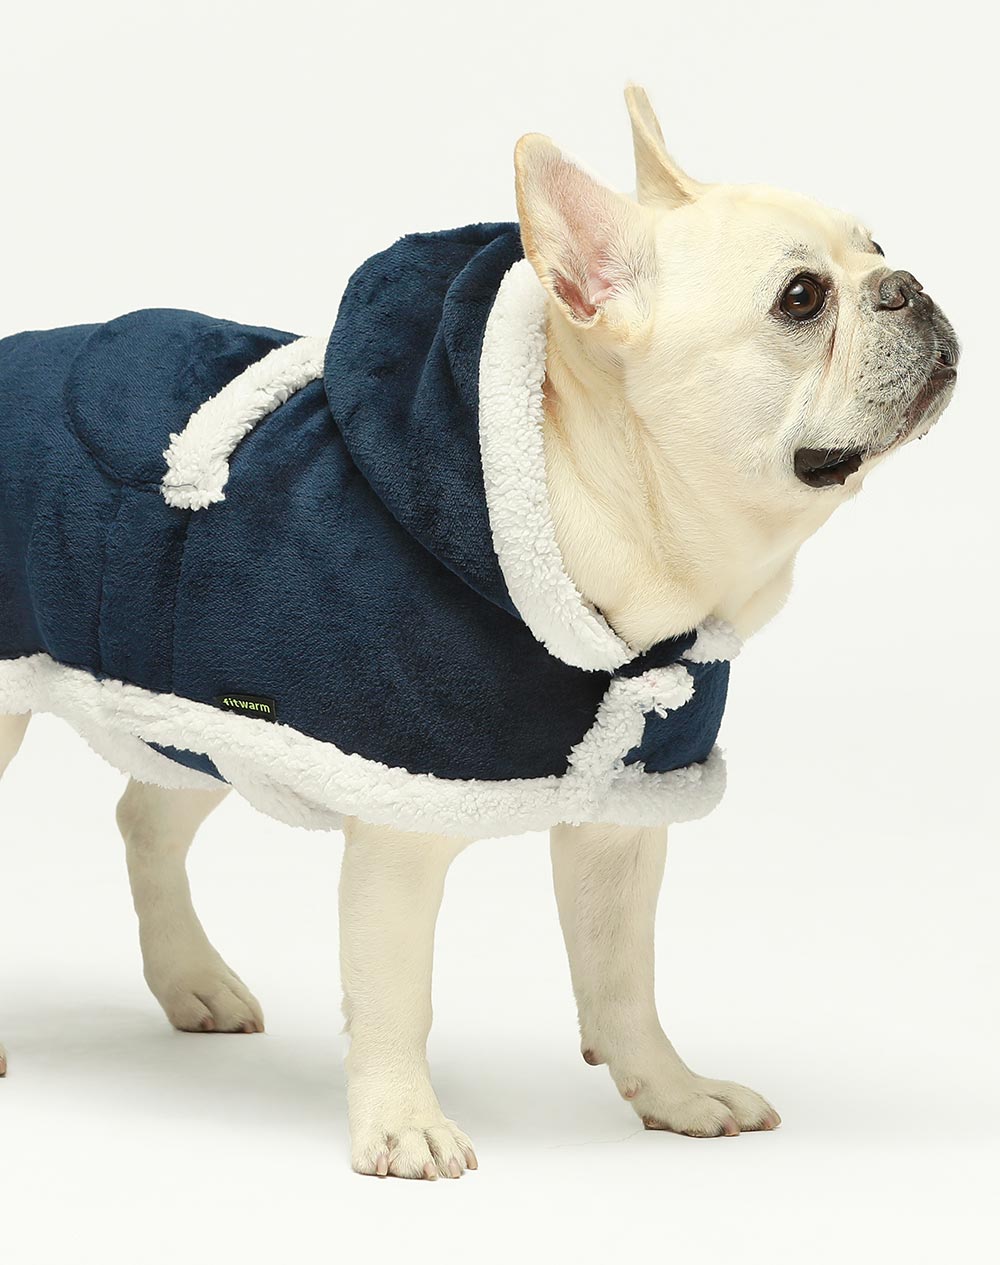 Frenchies in Flannel Hooded Blanket Dog Coats - Fitwarm Dog Clothes